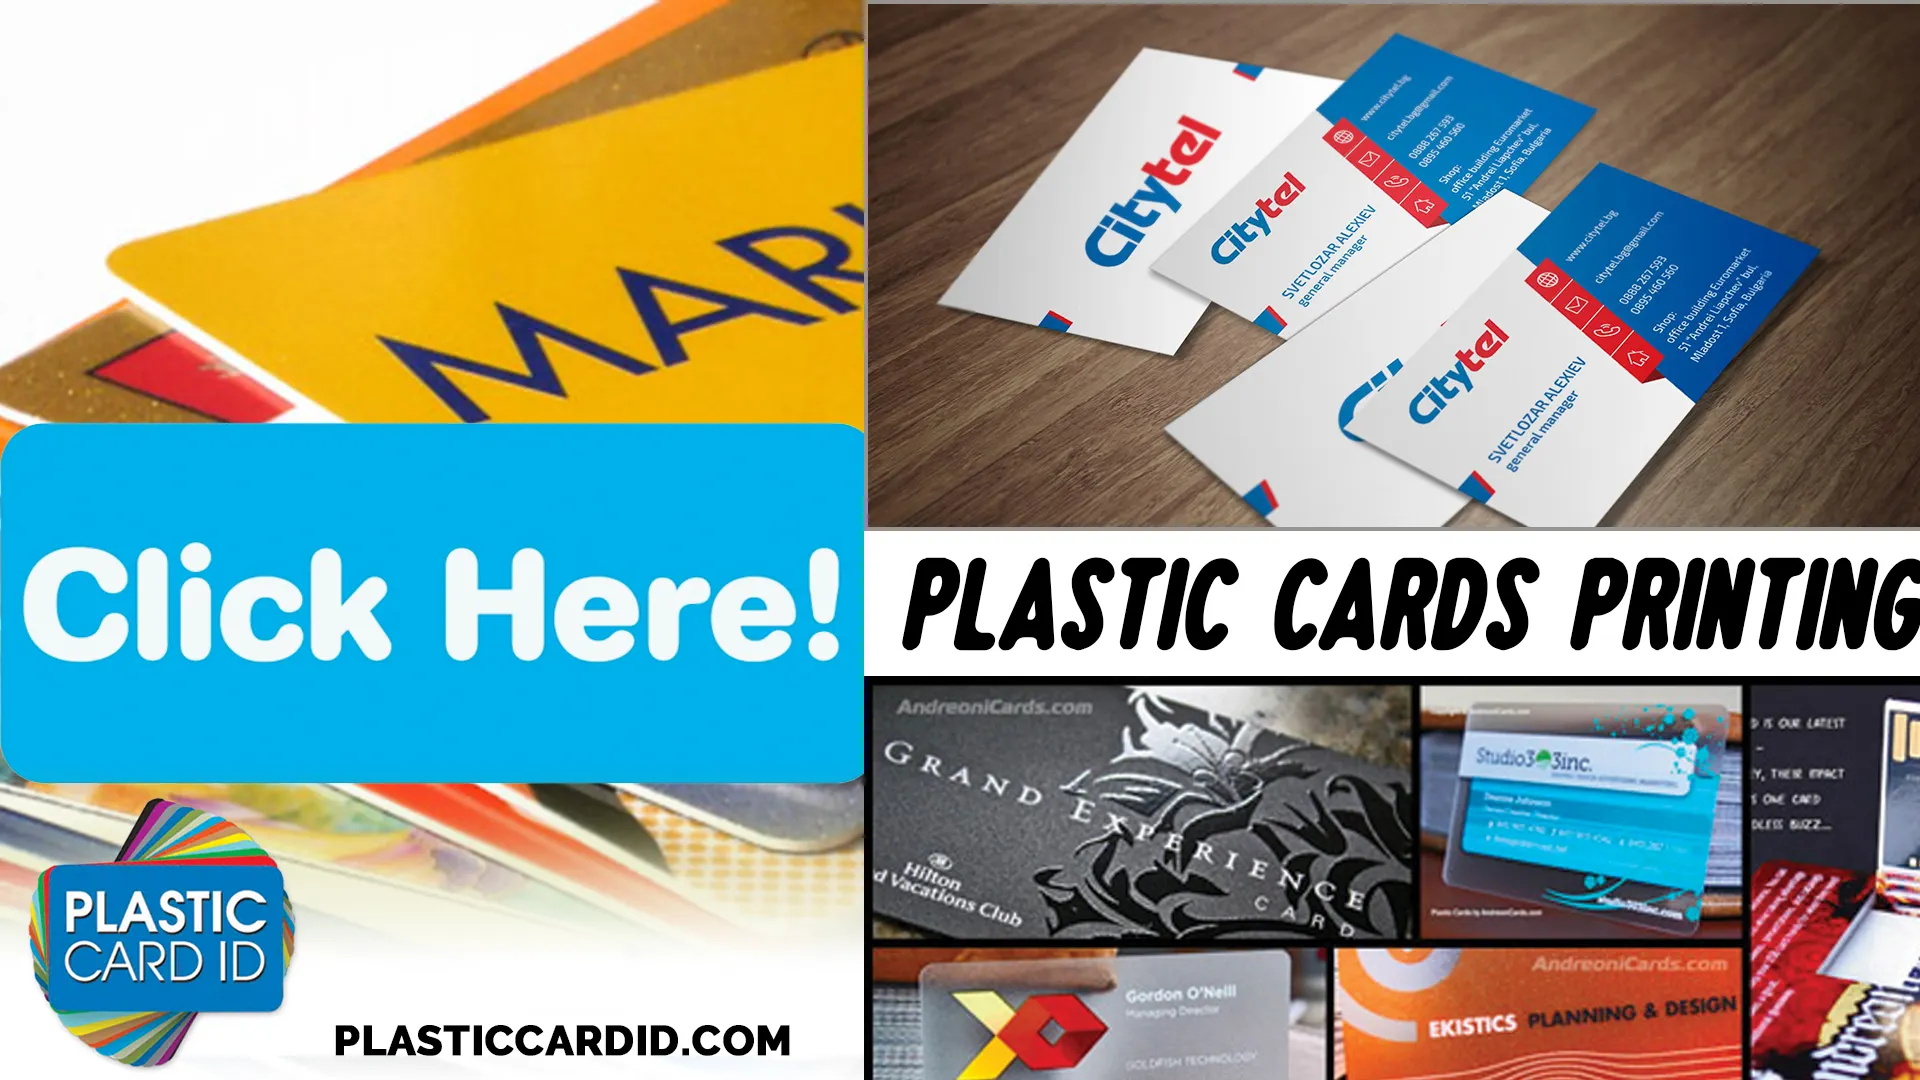 Optimizing Your Business Operations with Plastic Card ID
